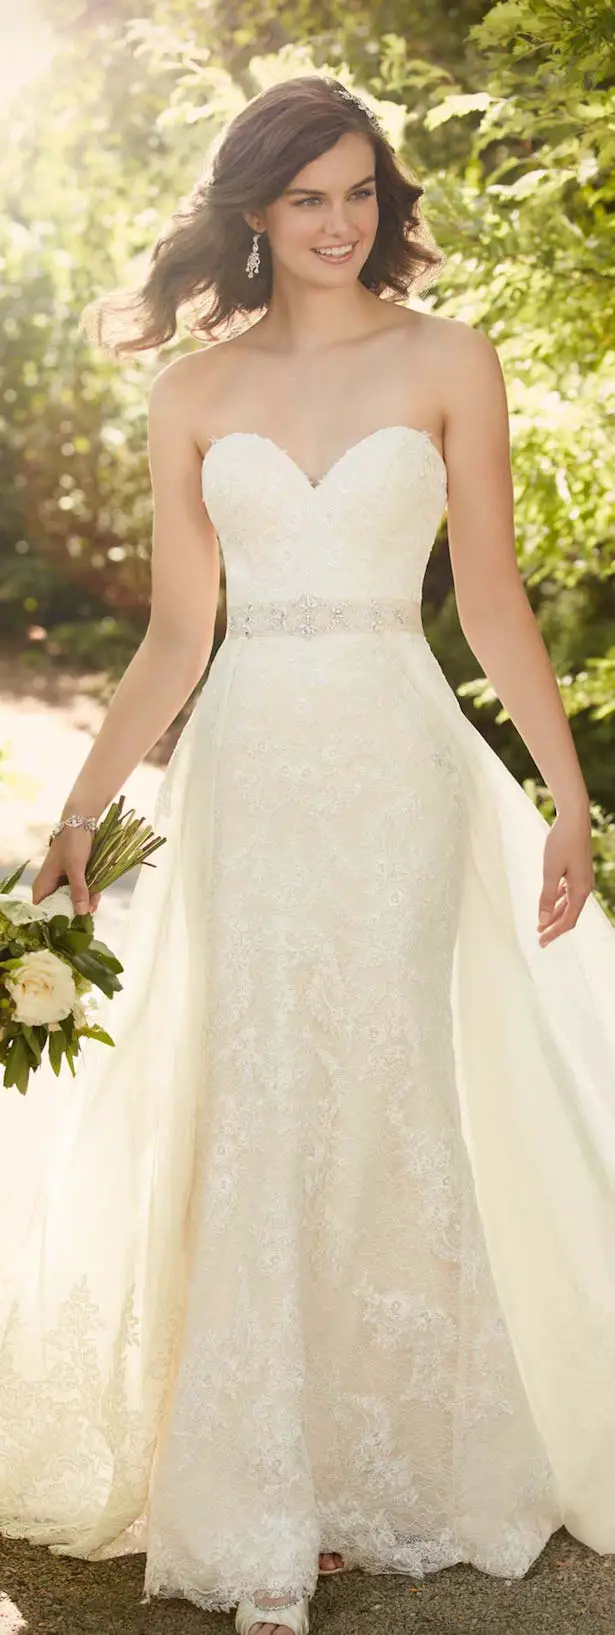 Bridal Trends Wedding Dresses with Detachable Skirts